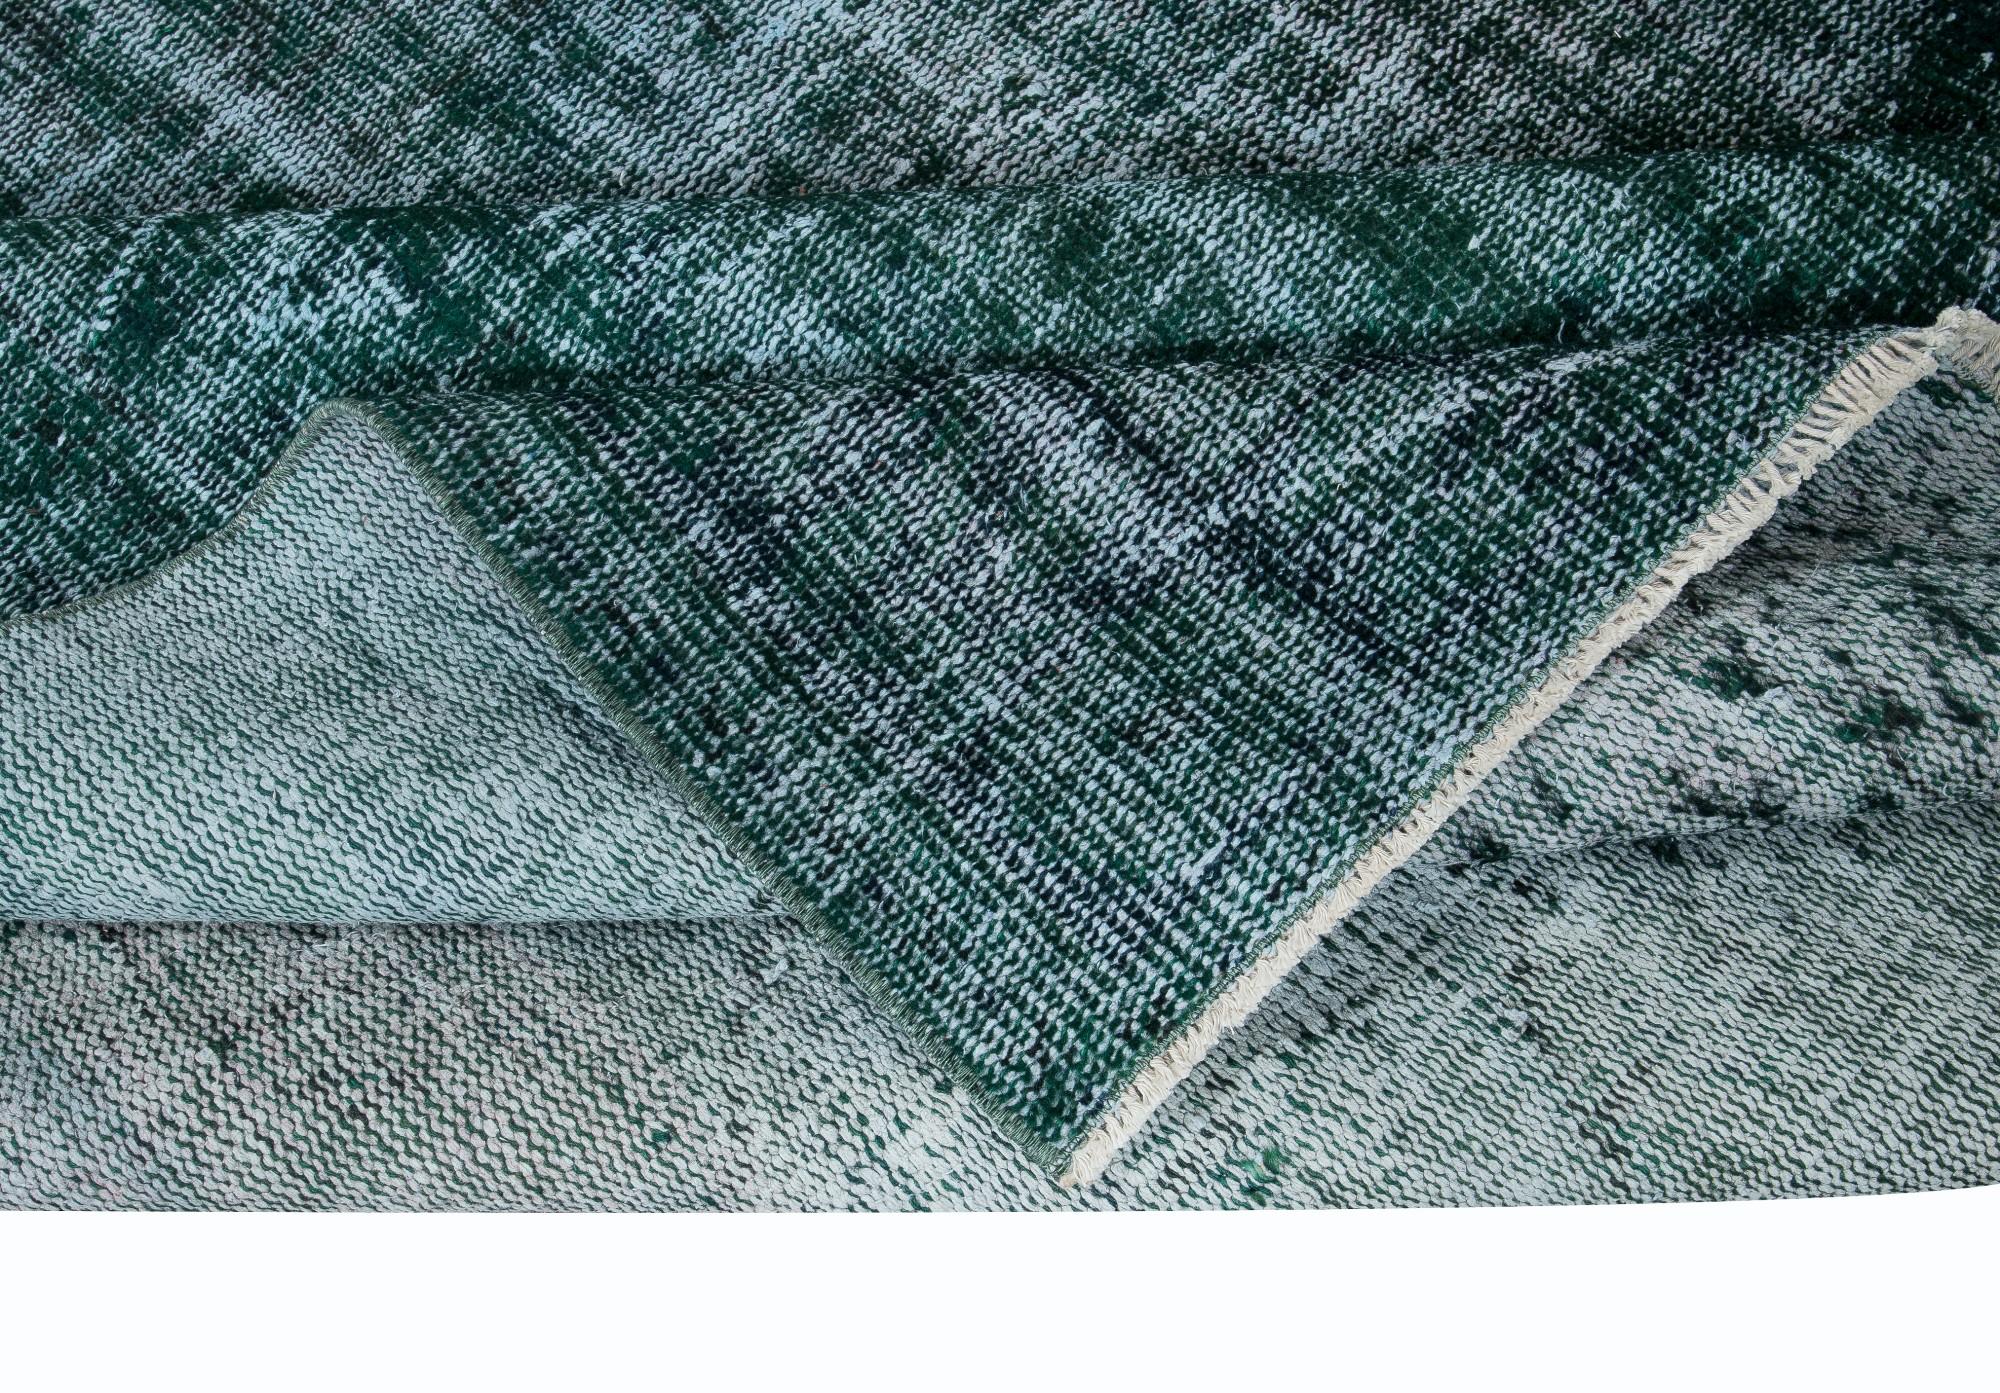 Hand-Woven 5.2x8.6 Ft Modern Handmade Turkish Green Area Rug with Shabby Chic Style For Sale